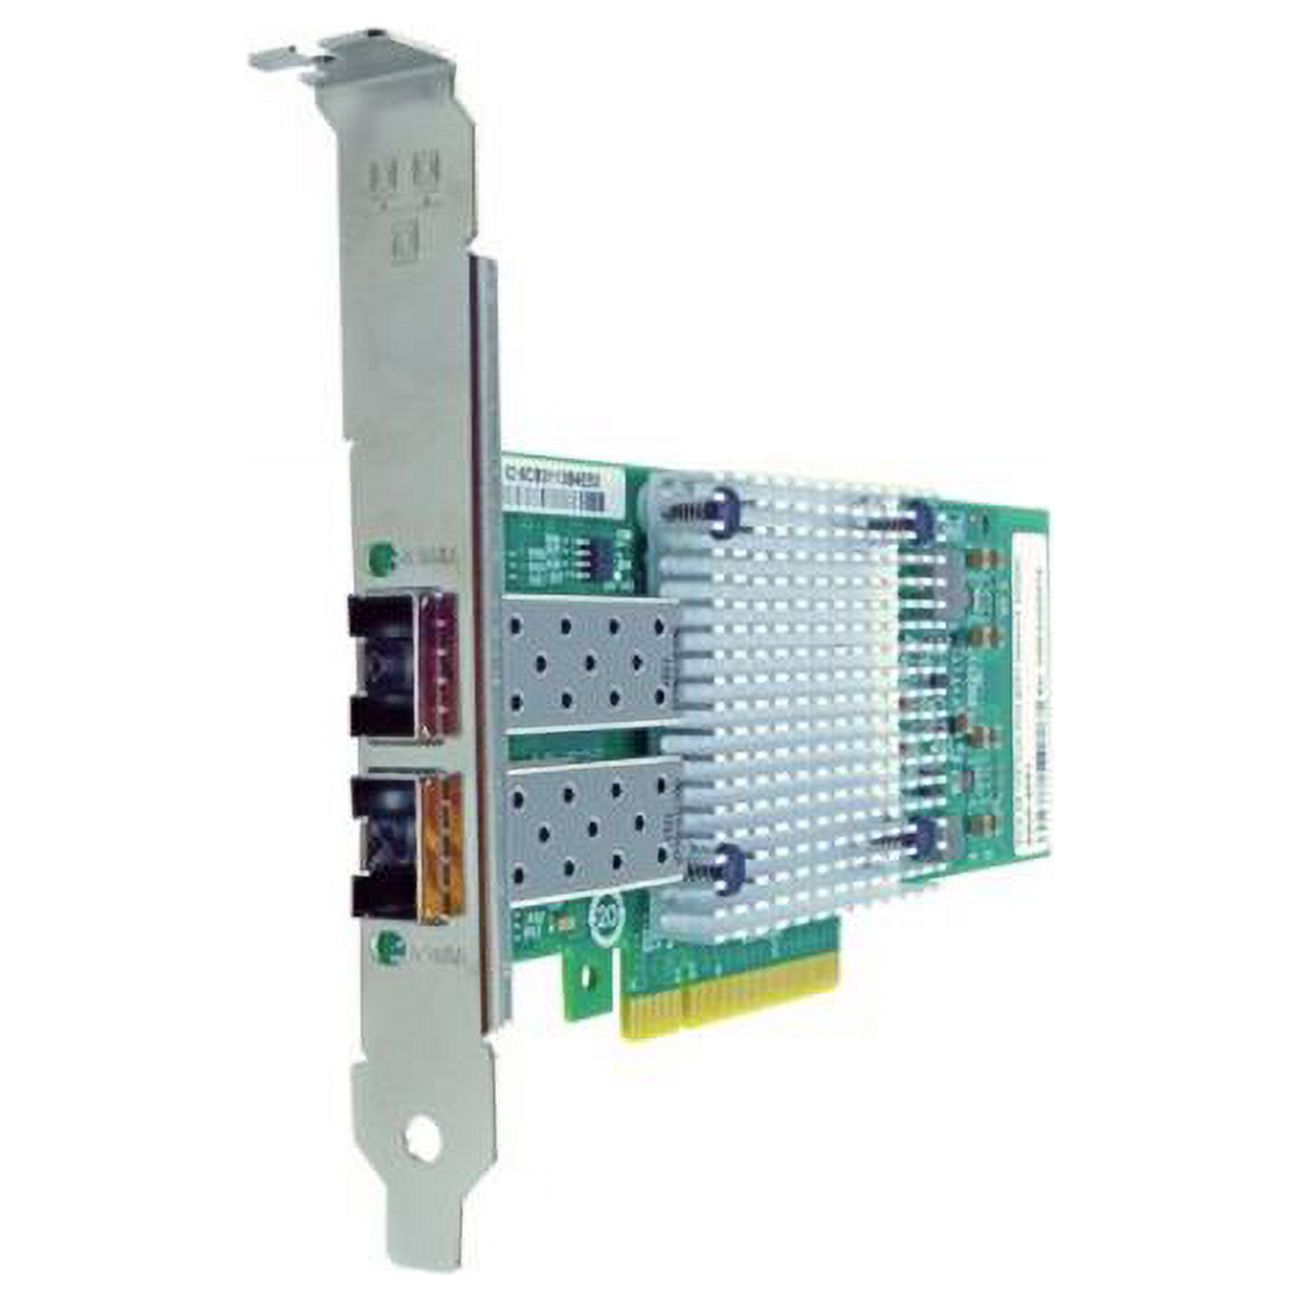 10GB Dual Port SFP Plus PCIe x8 NIC Card for Dell - image 1 of 1